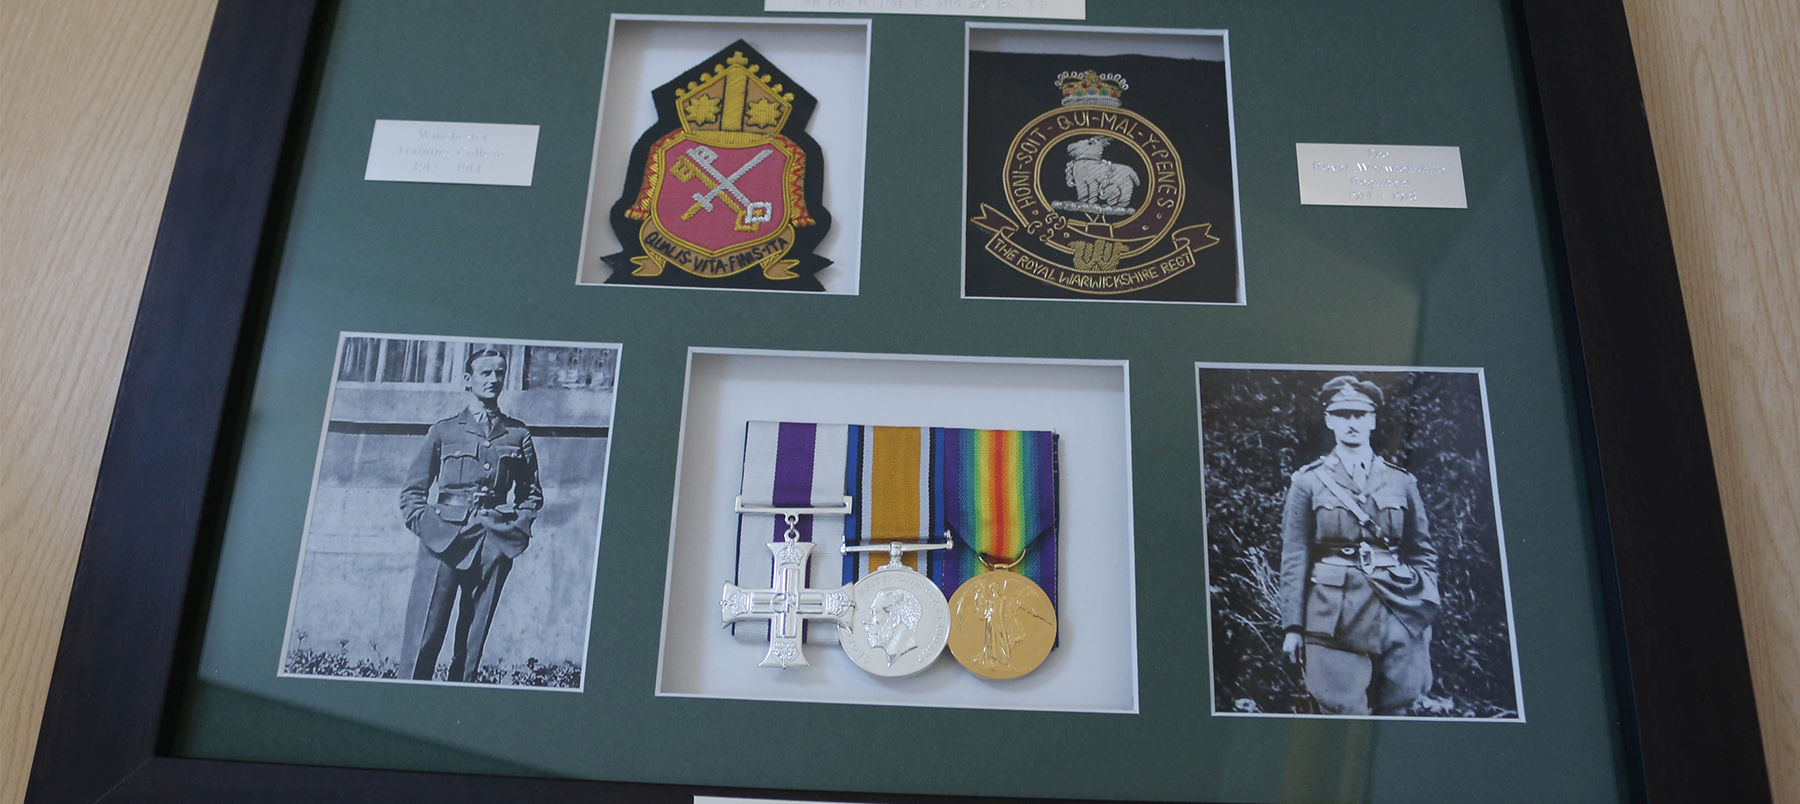 Framed presentation of military medals and badges from WWI veteran